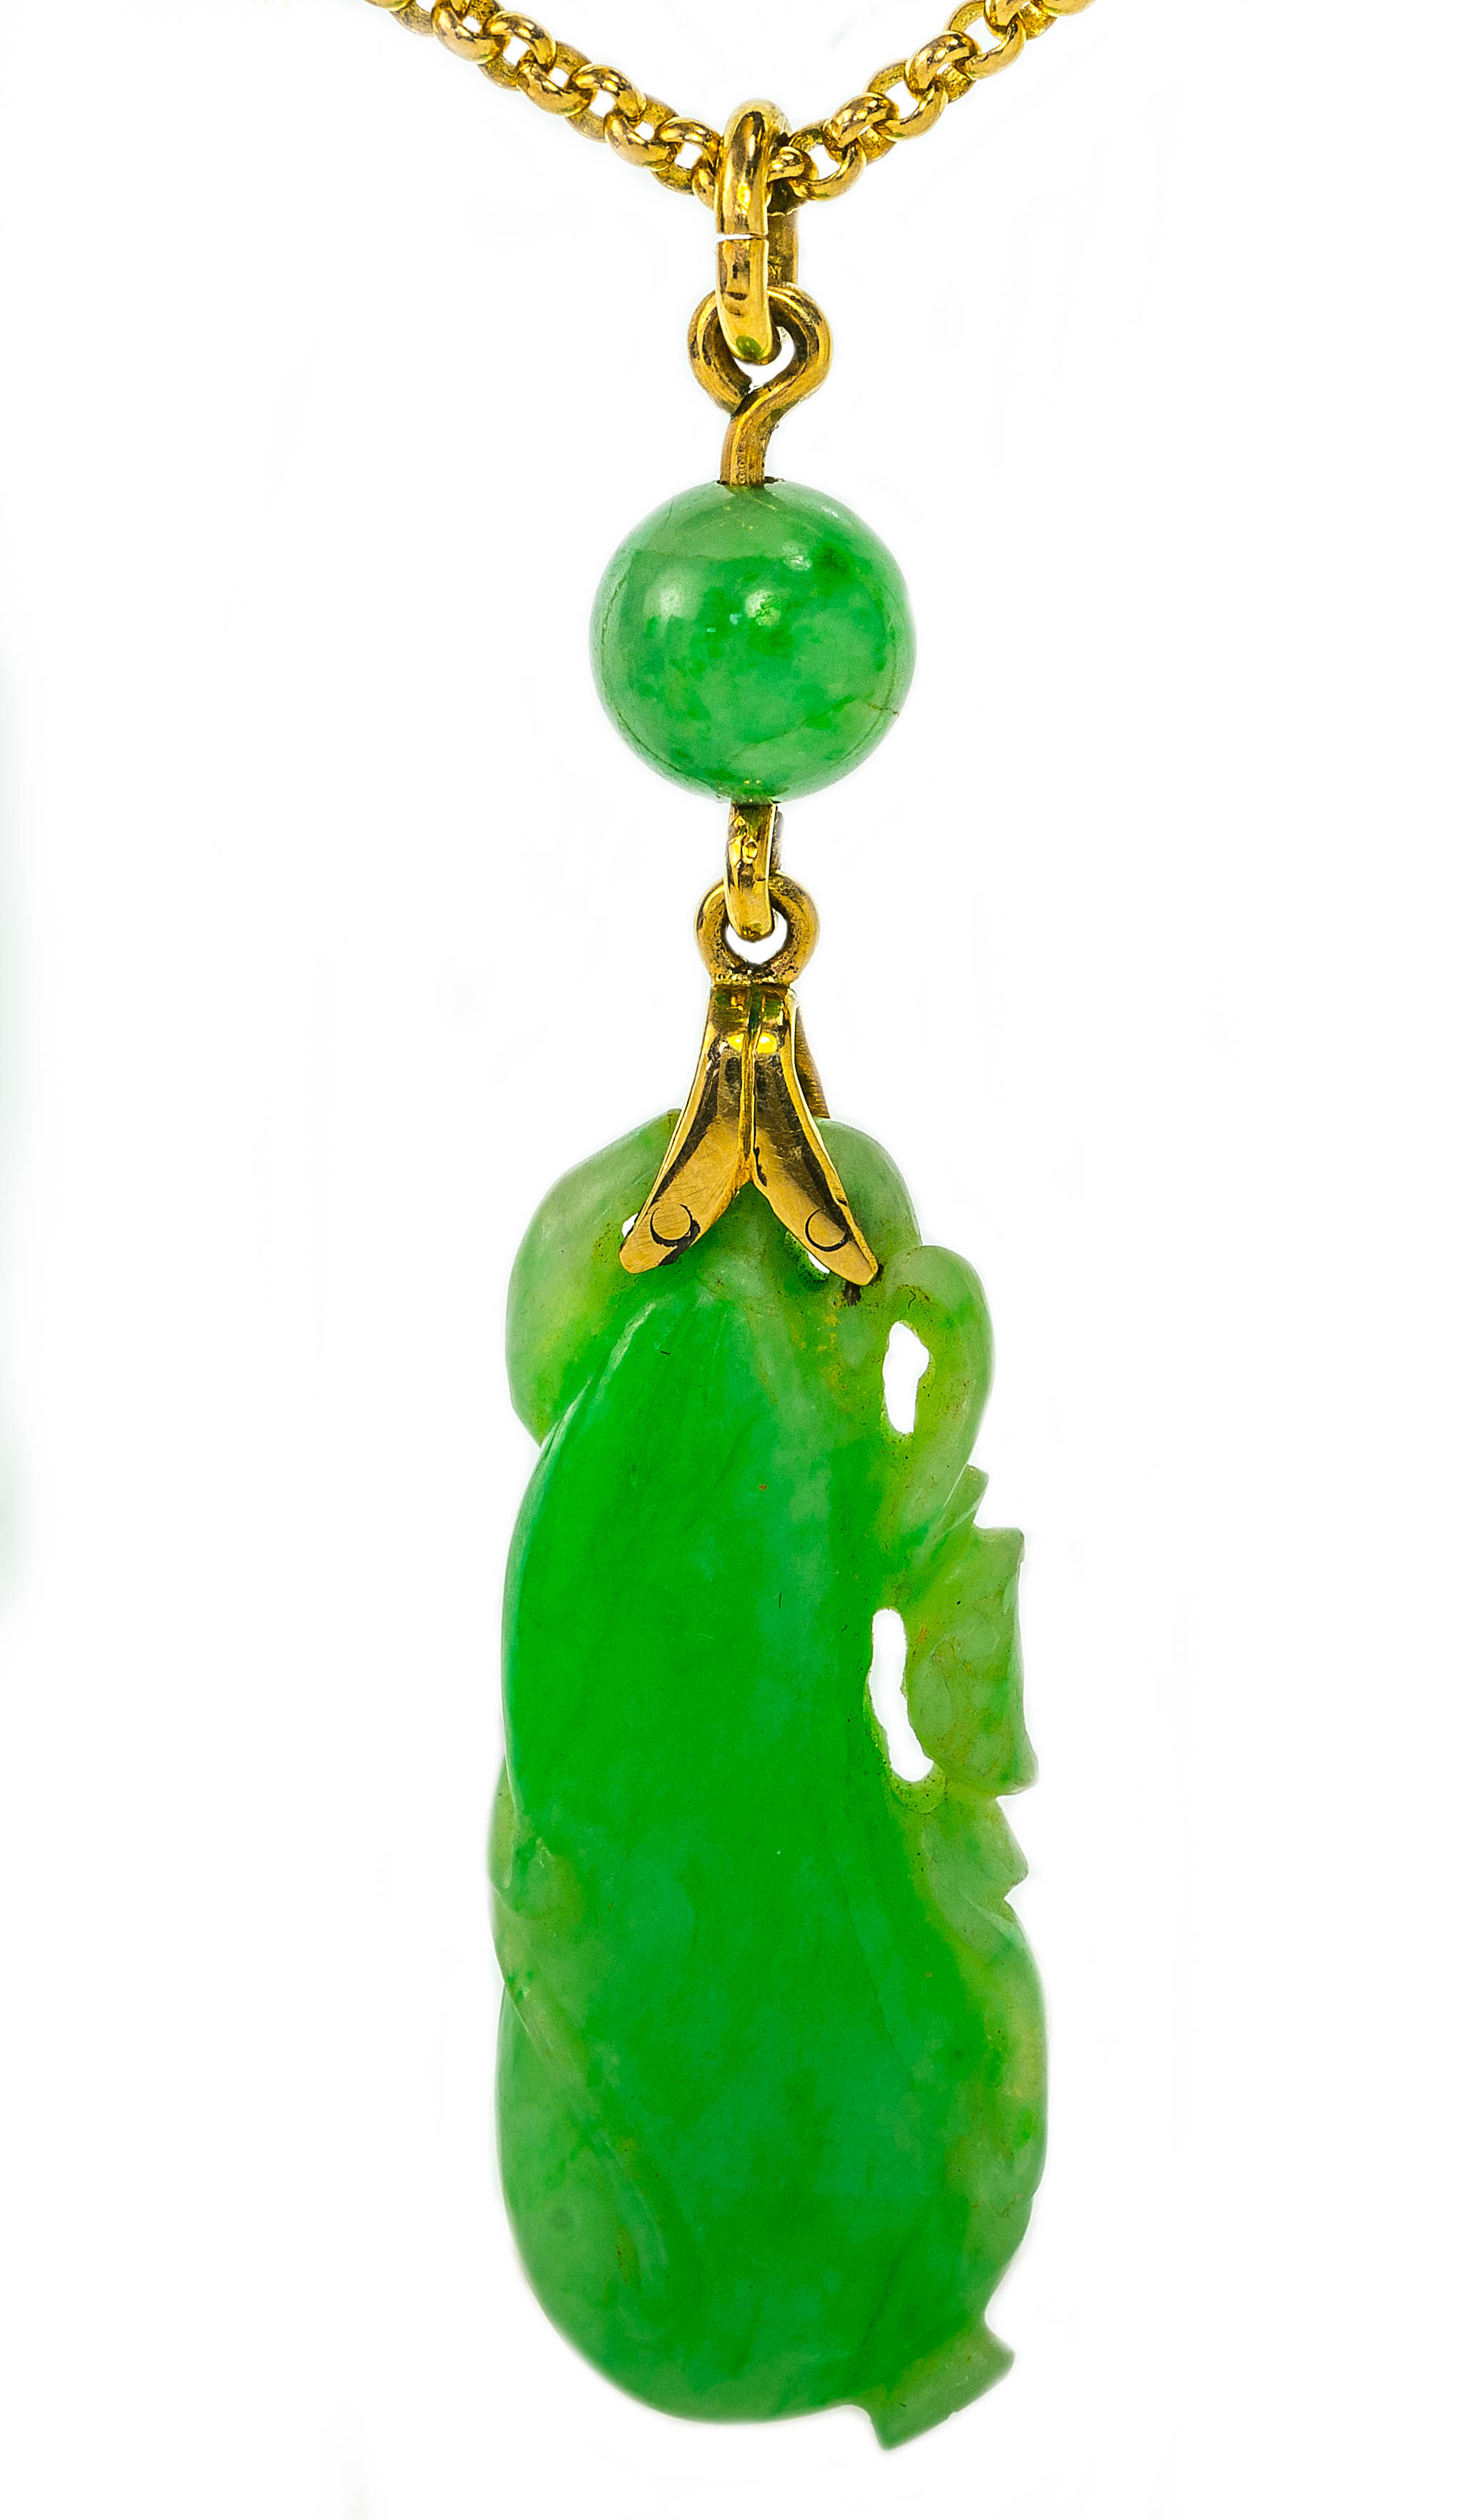 A gold and jadeite pendant on gold chain, pendant length 5.5cm width 1.5cm, chain length 36cm. Total - Image 2 of 2